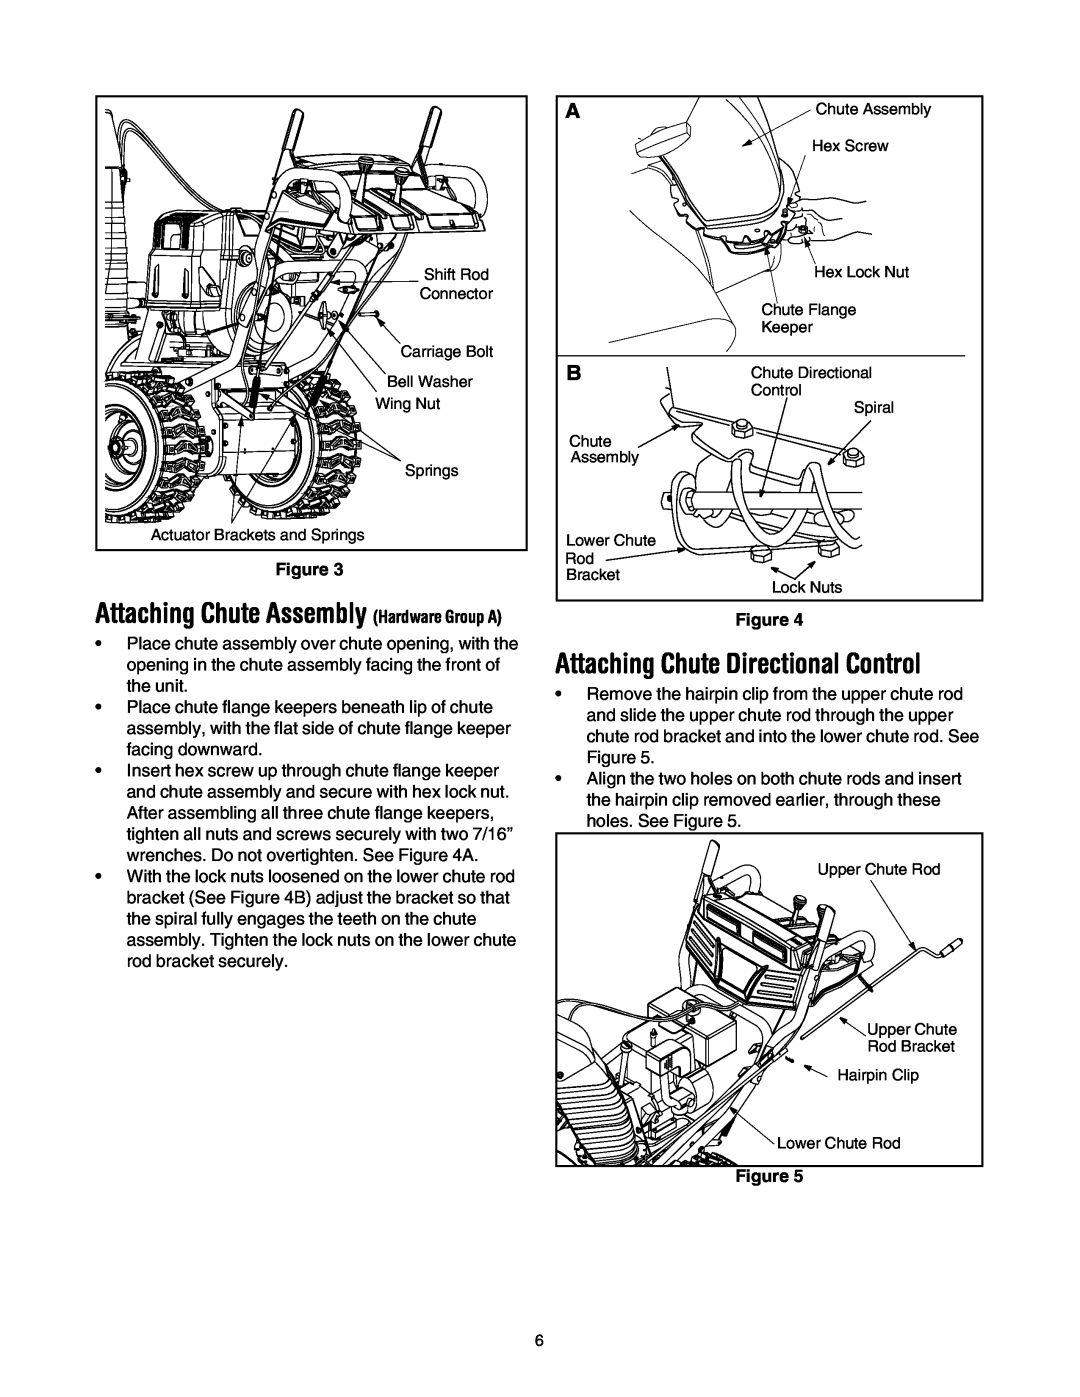 Troy-Bilt 10530 manual Attaching Chute Directional Control, Attaching Chute Assembly Hardware Group A 